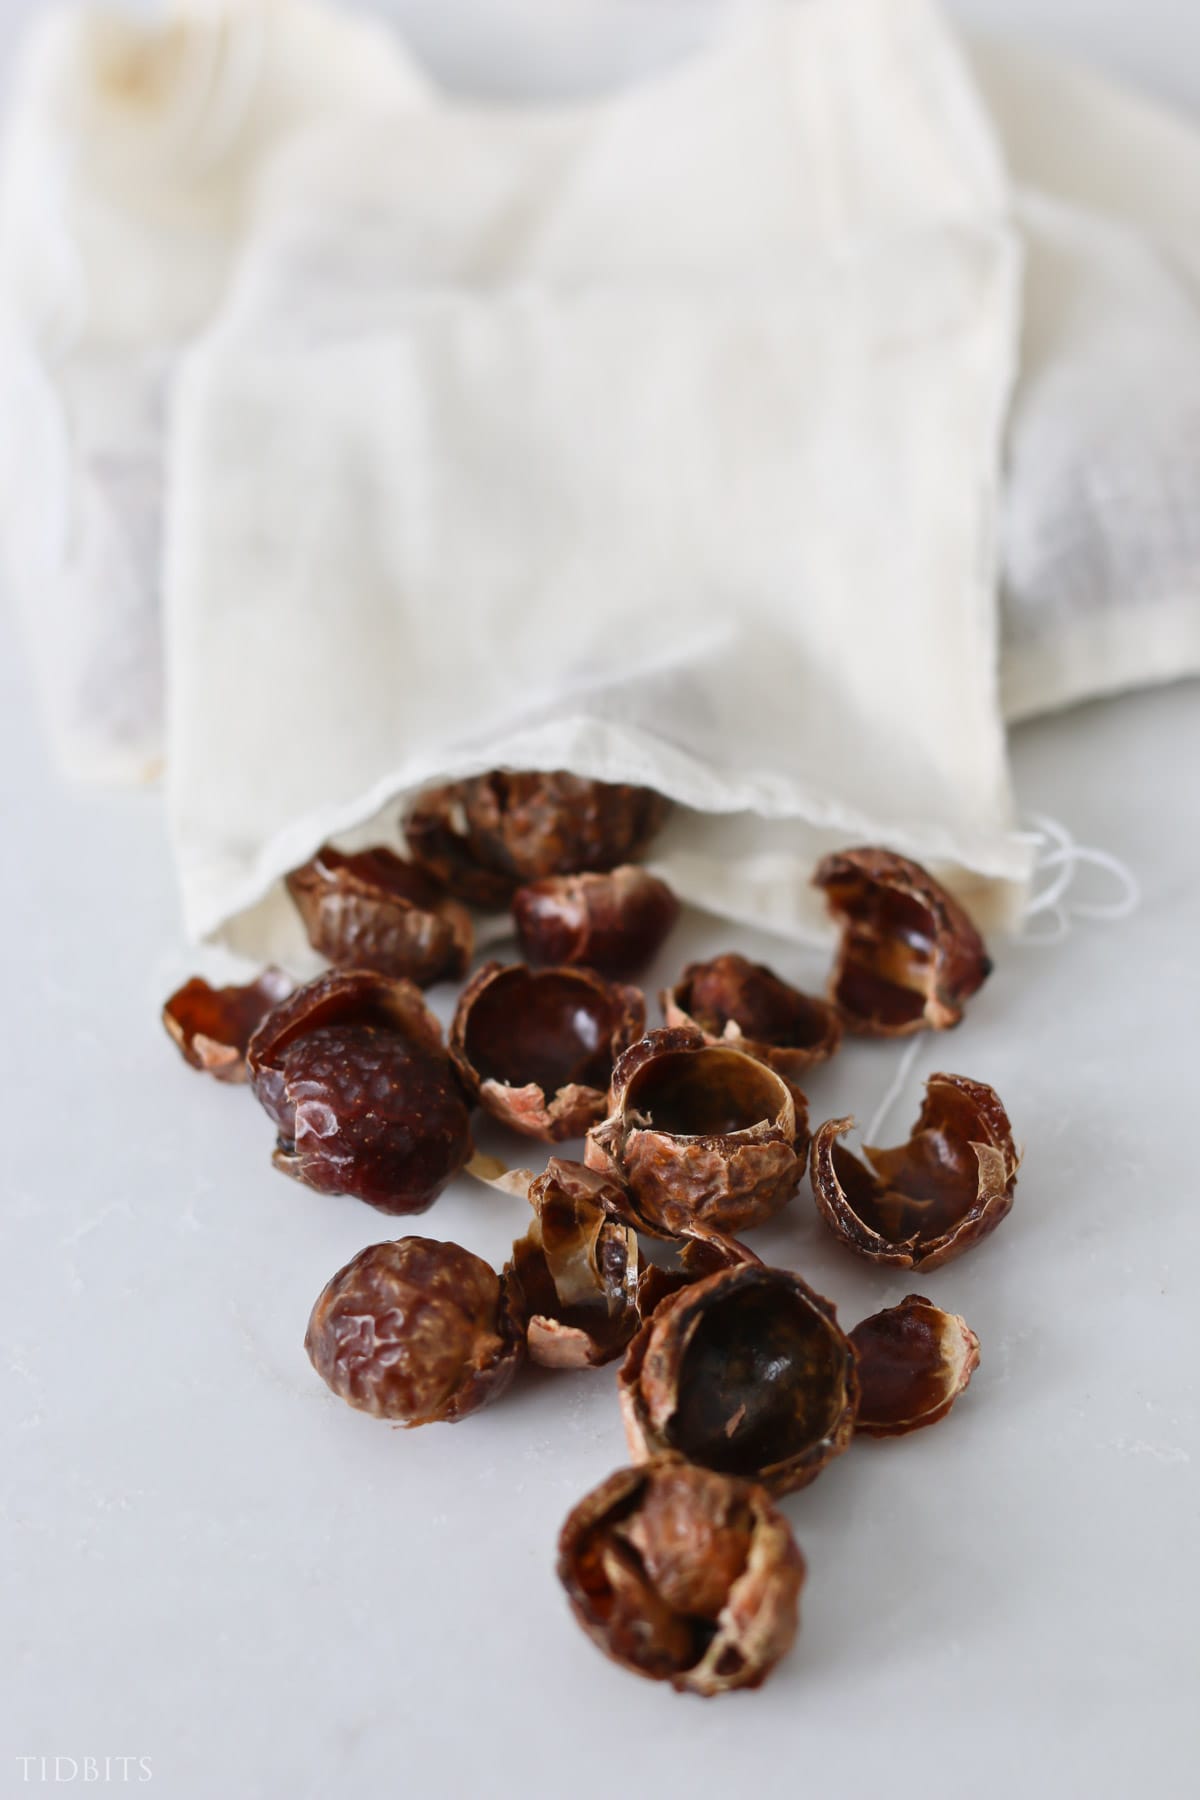 use soap nuts inside a muslin bag and toss in your washer for laundry